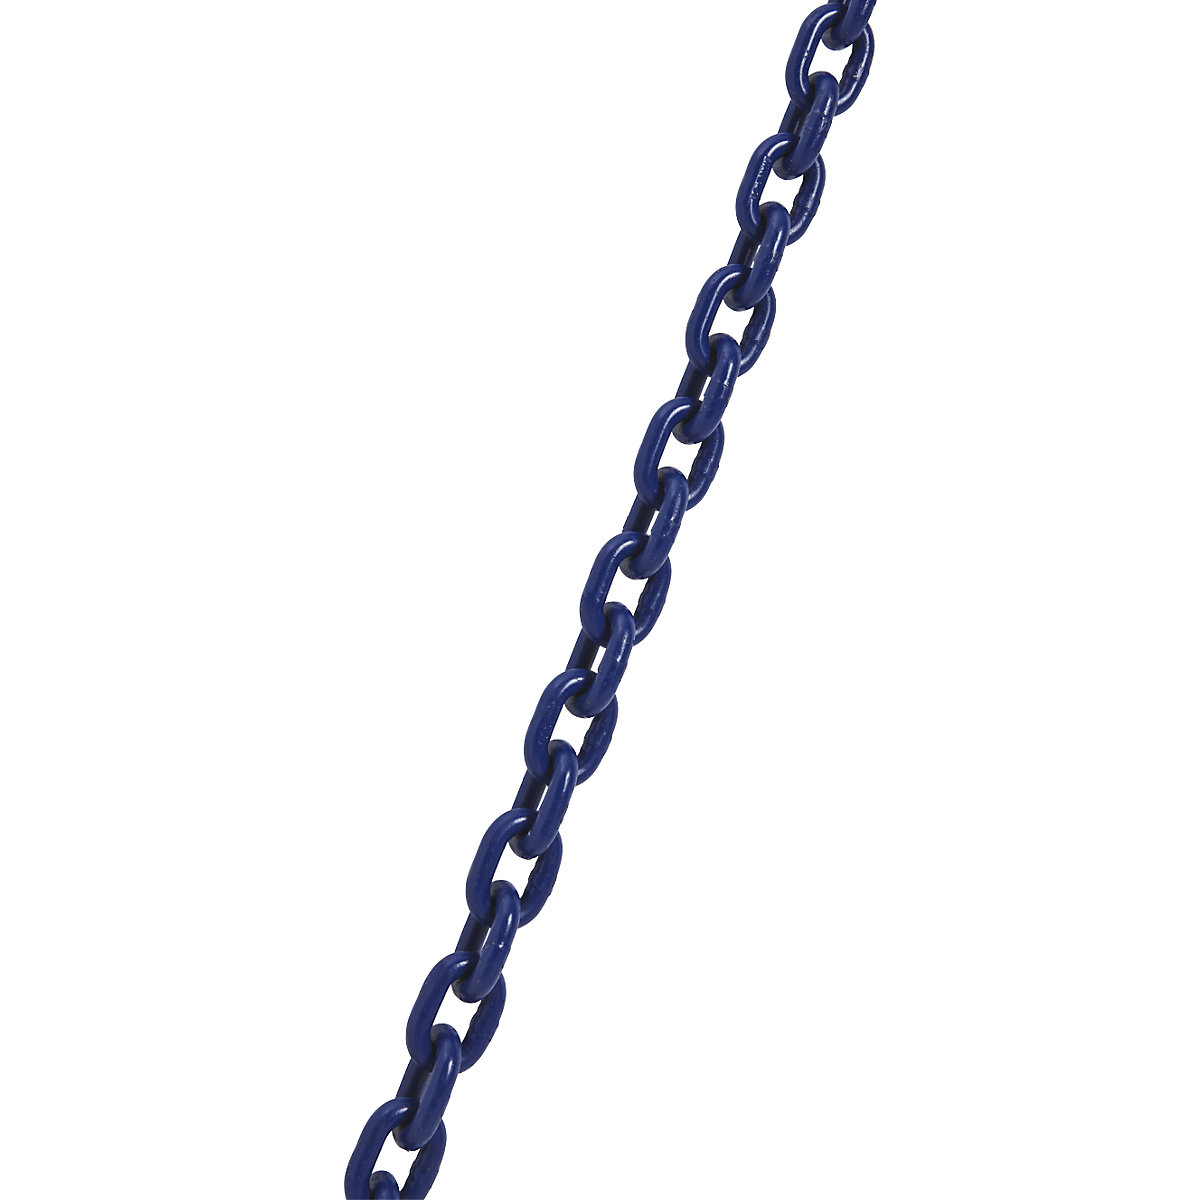 GK10 chain sling, extra cost per m, double leg